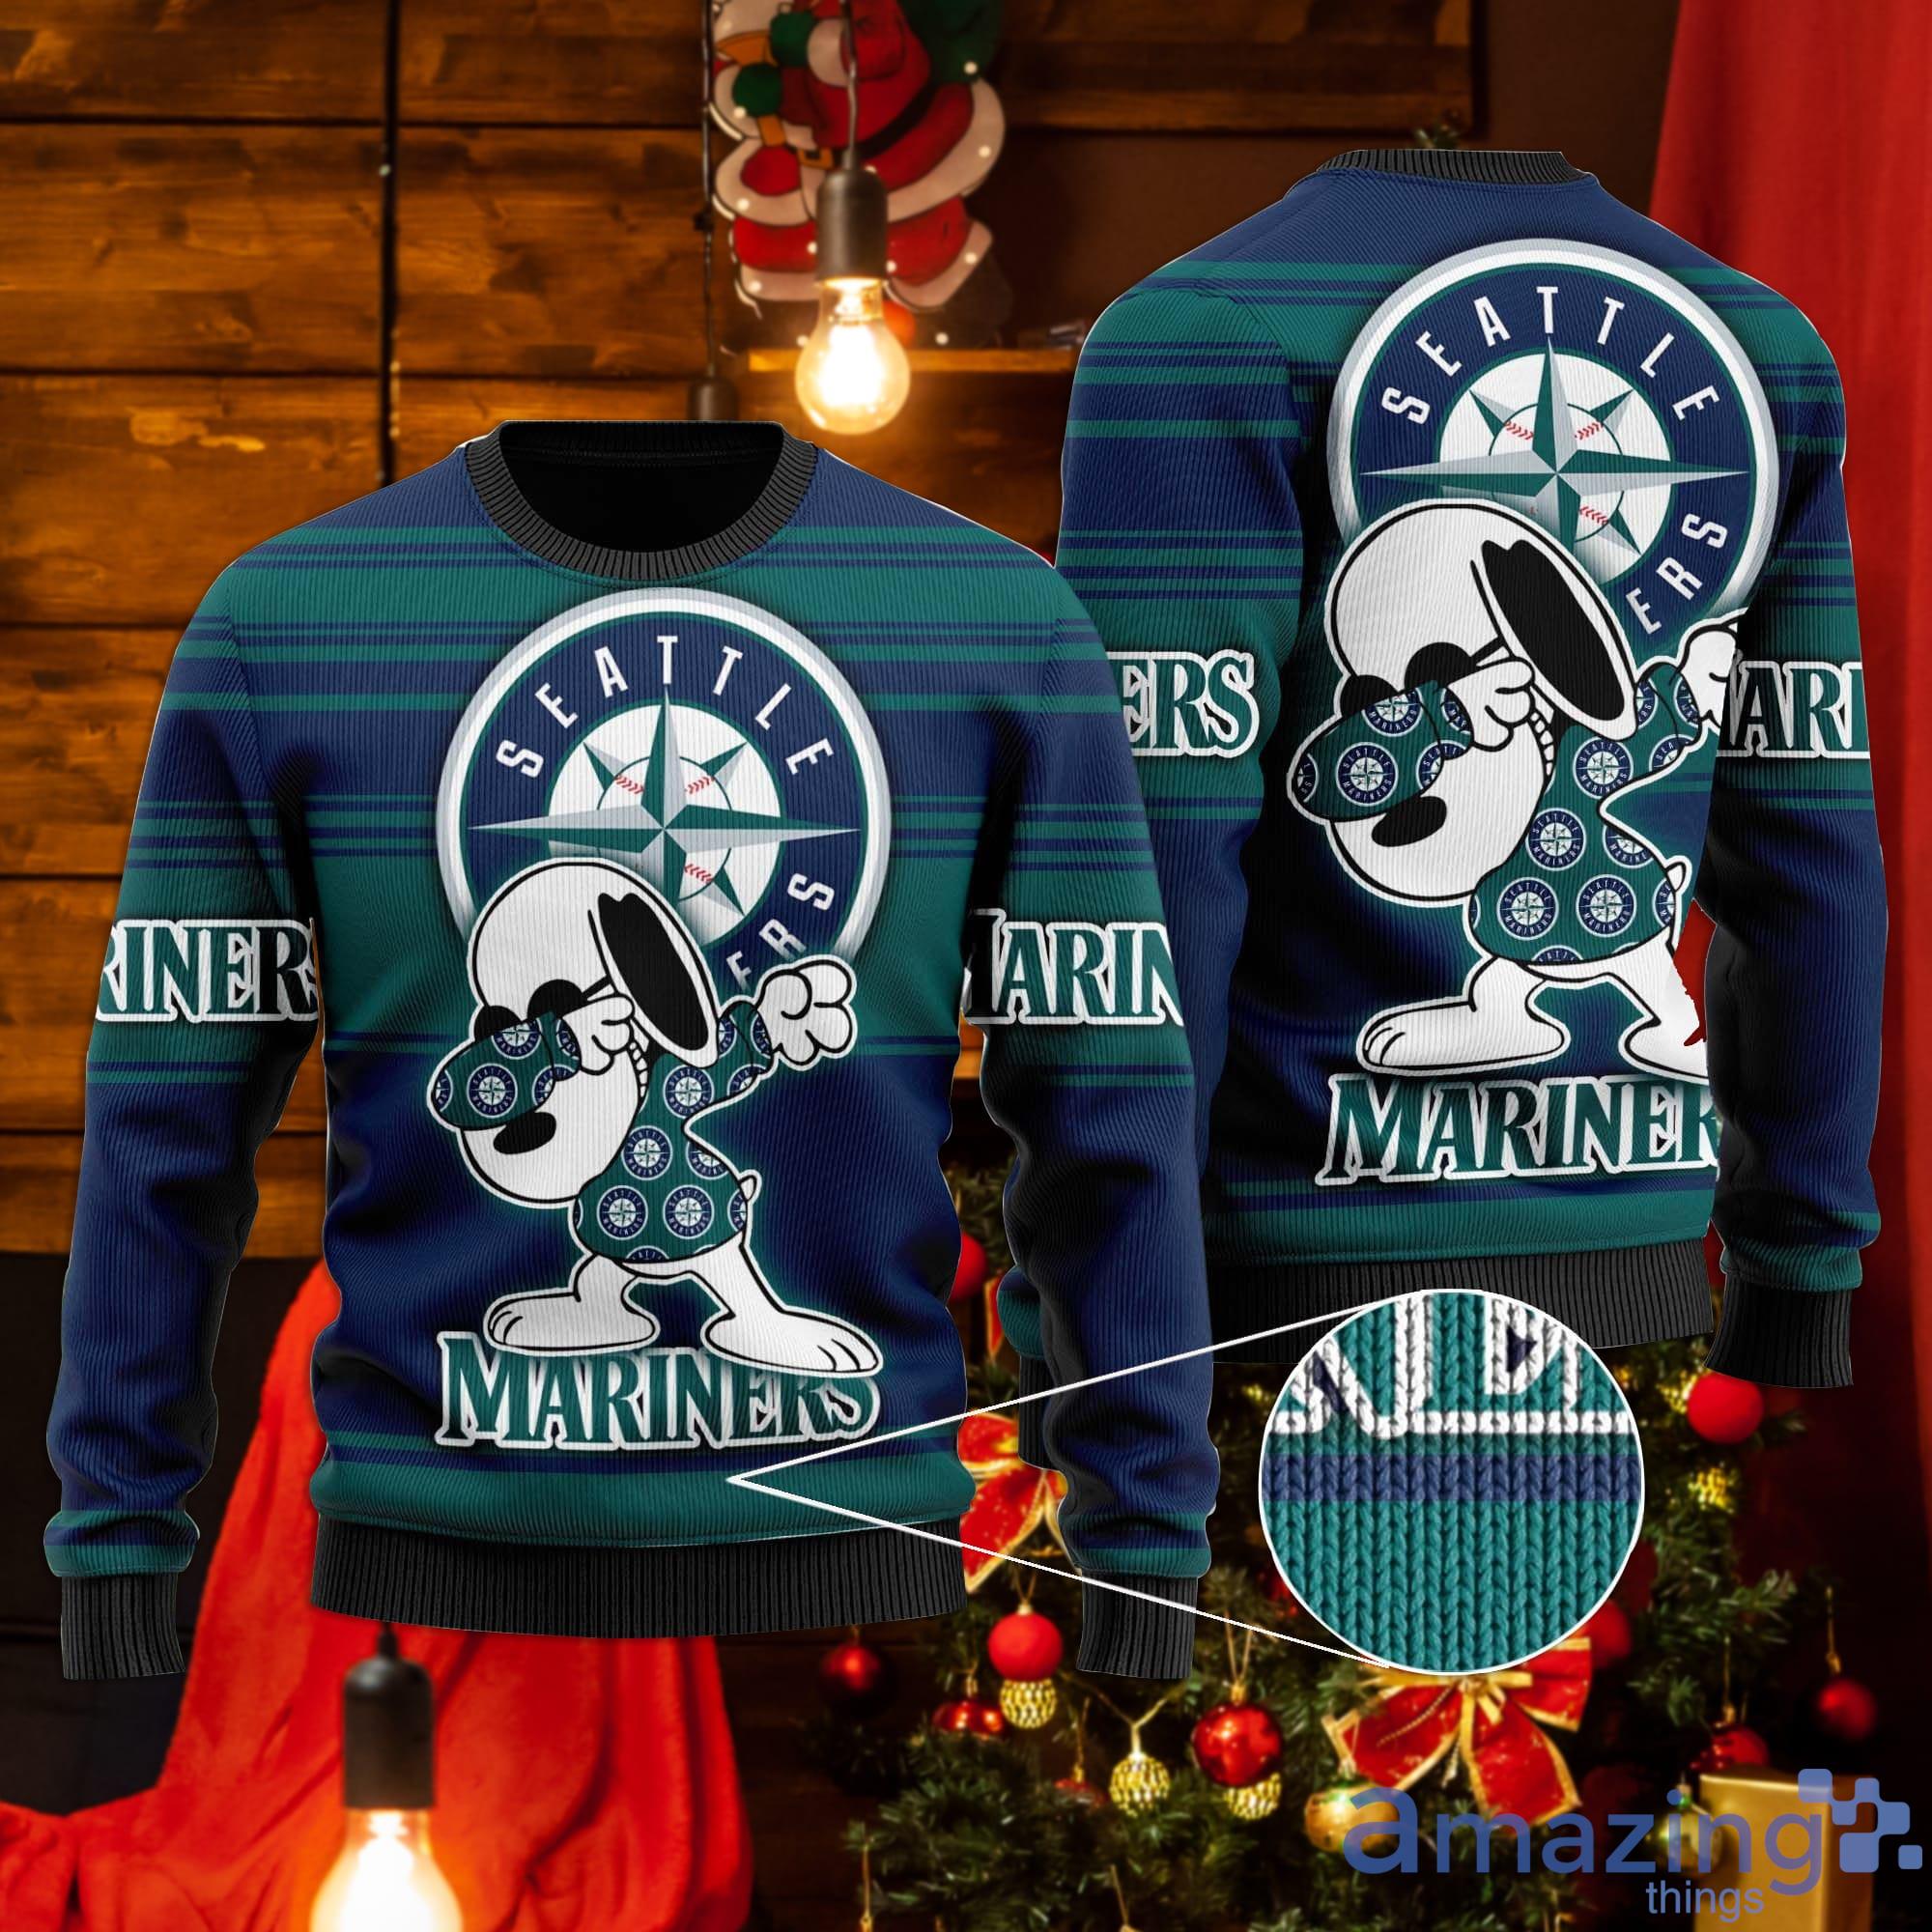 Official Love wins Seattle mariners shirt, hoodie, sweater, long